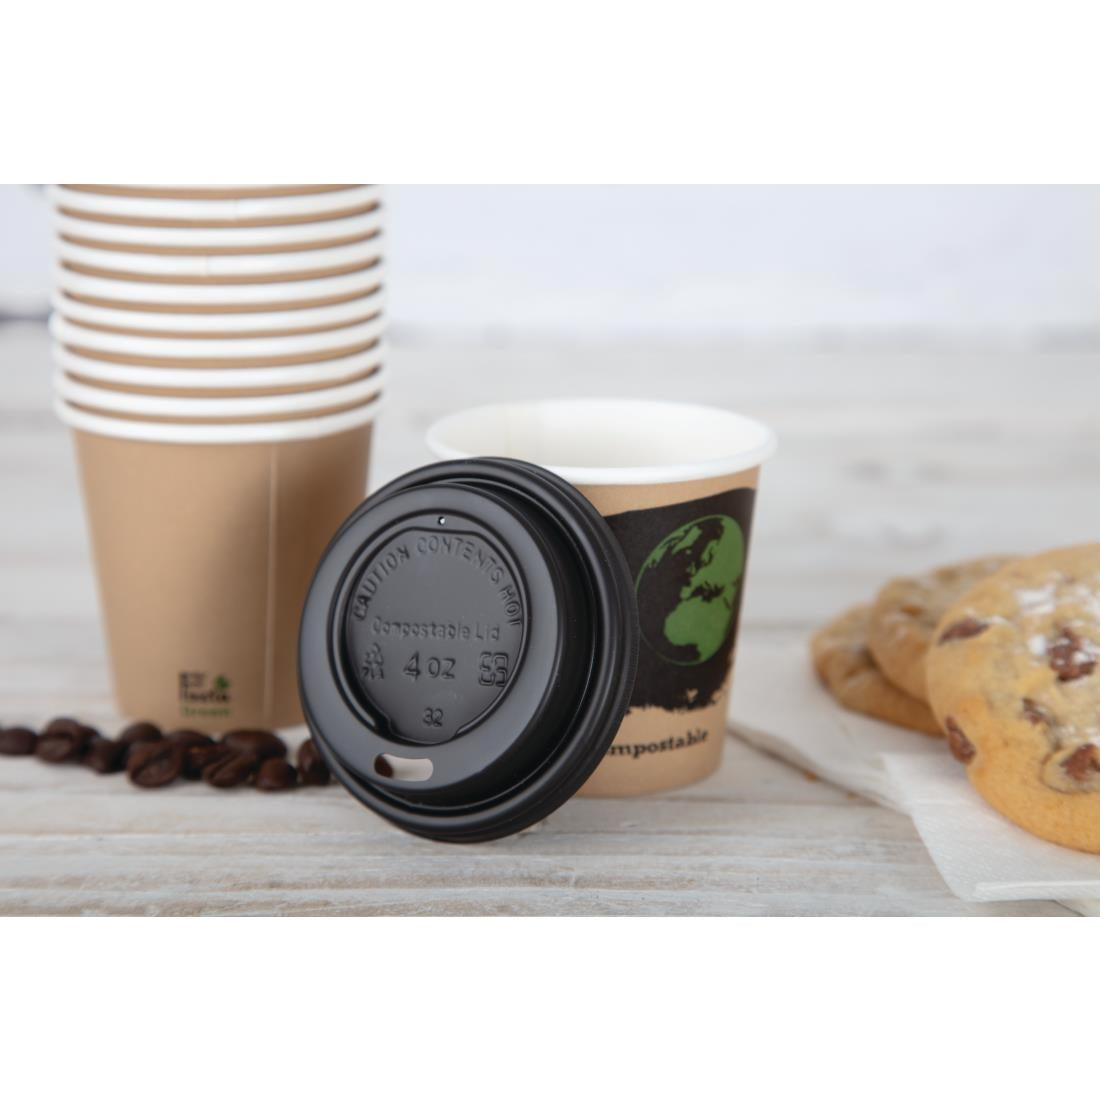 DY982 Fiesta Compostable Espresso Cup Lids 113ml / 4oz (Pack of 50) JD Catering Equipment Solutions Ltd